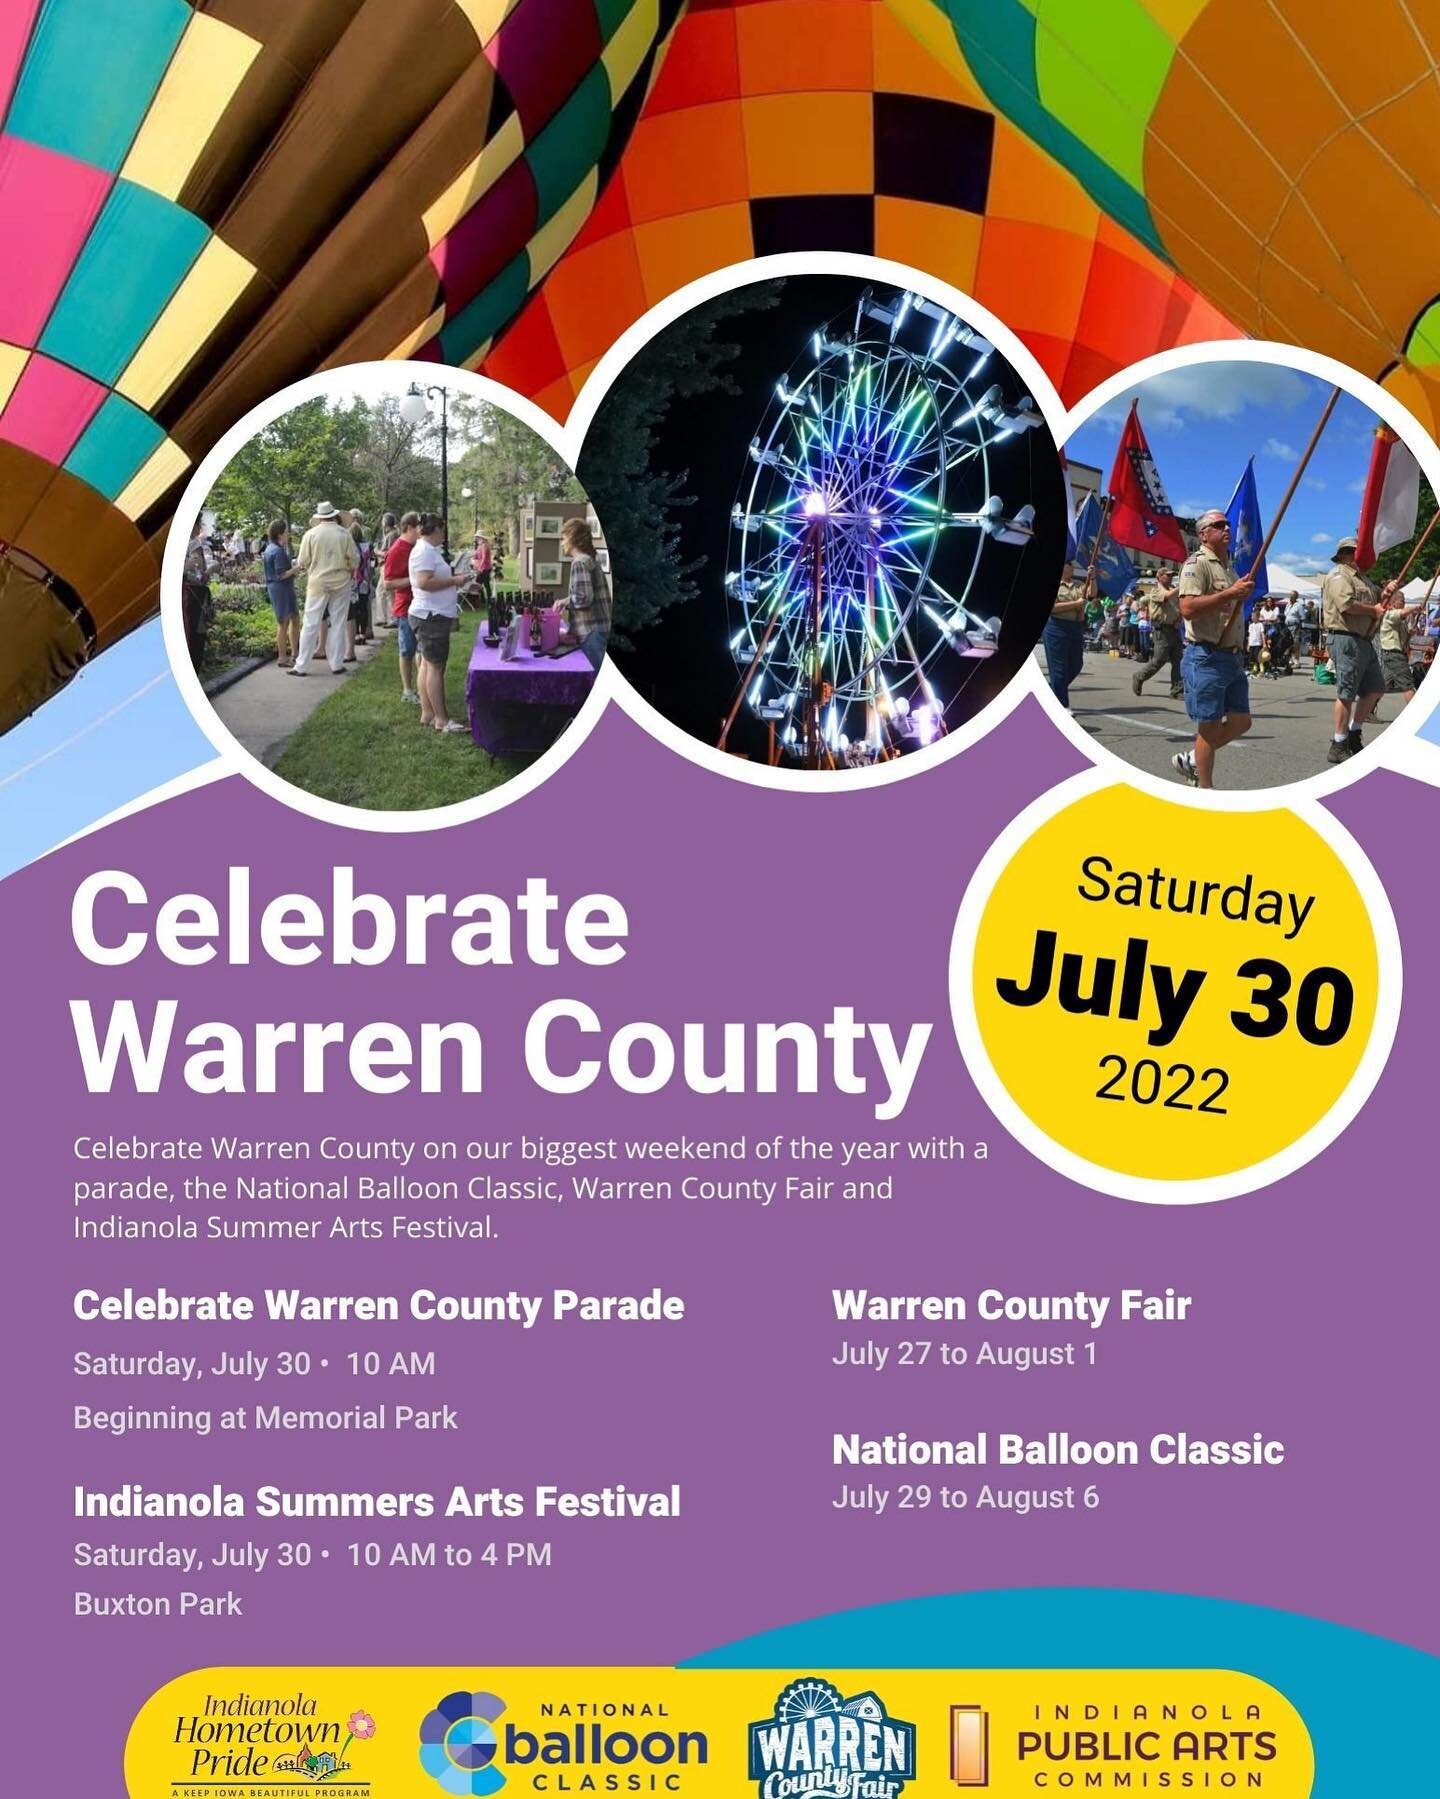 Get ready for our biggest weekend of the year! 🤩

🎡 @warrencofairia starts July 27
🎈 @thenationalballoonclassic starts July 29
🎨 Indianola Summer Art Festival and the 
🎉 Celebrate Warren County Parade are July 30!

#wanderwarrencounty #thisisiow